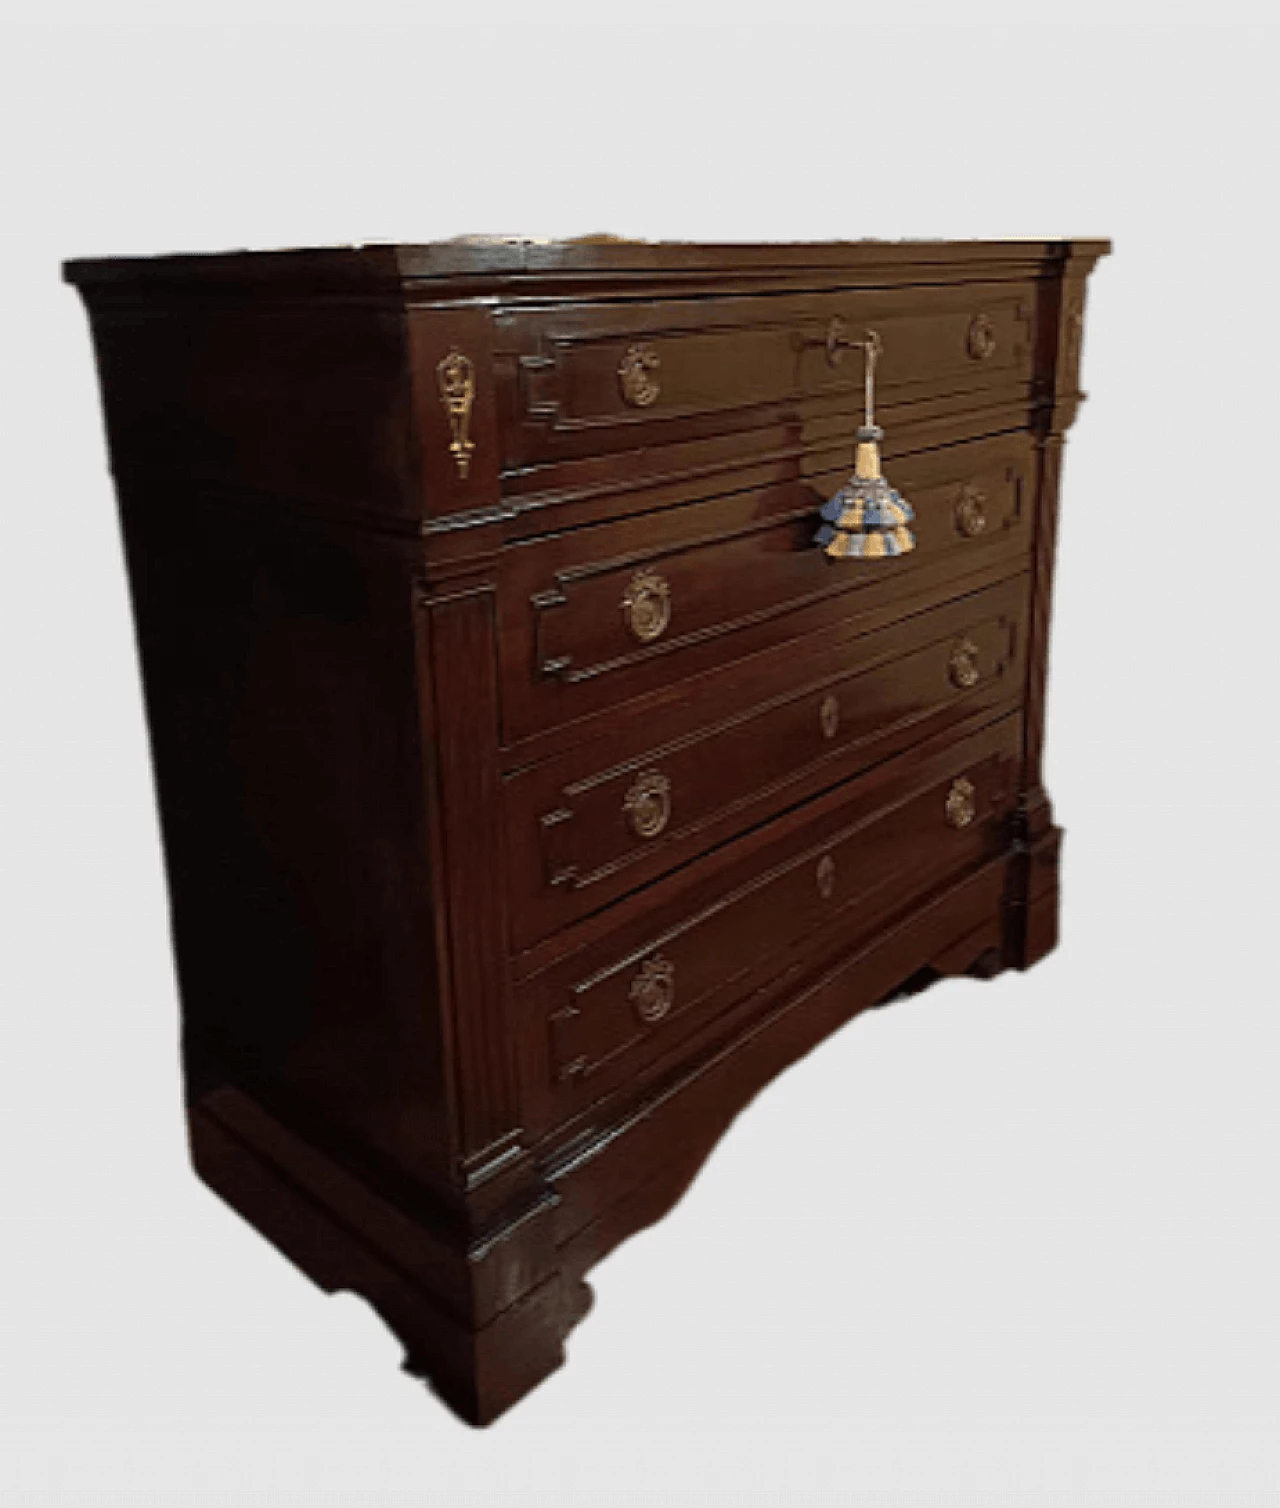 Mahogany Empire chest of drawers with gilt bronze friezes and handles, 19th century 1